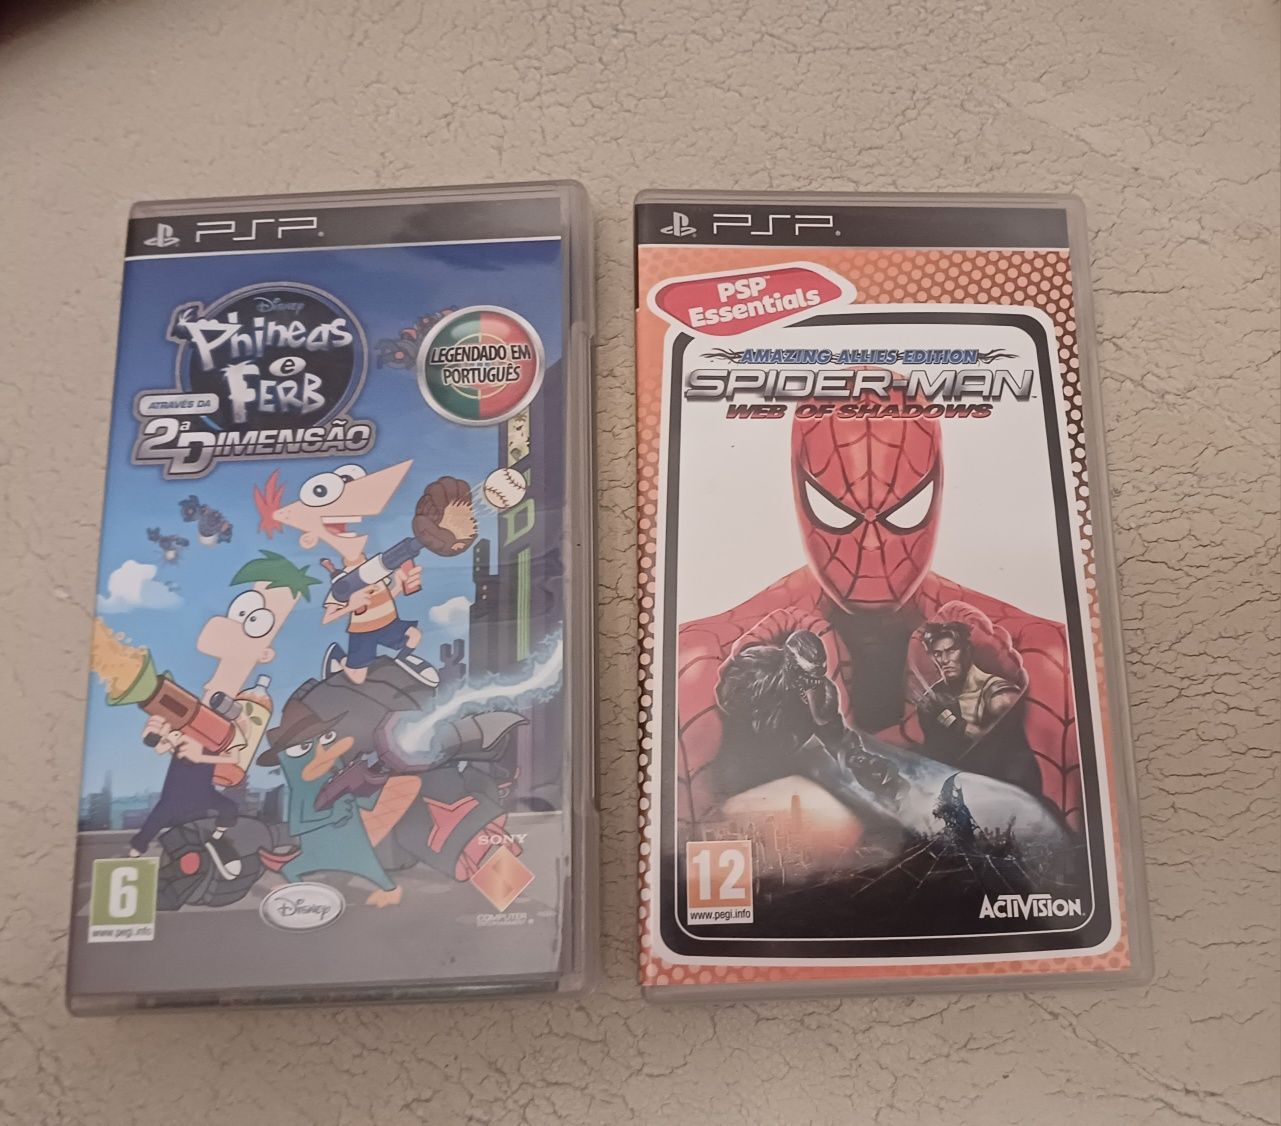 Phineas and Ferb + spider man psp